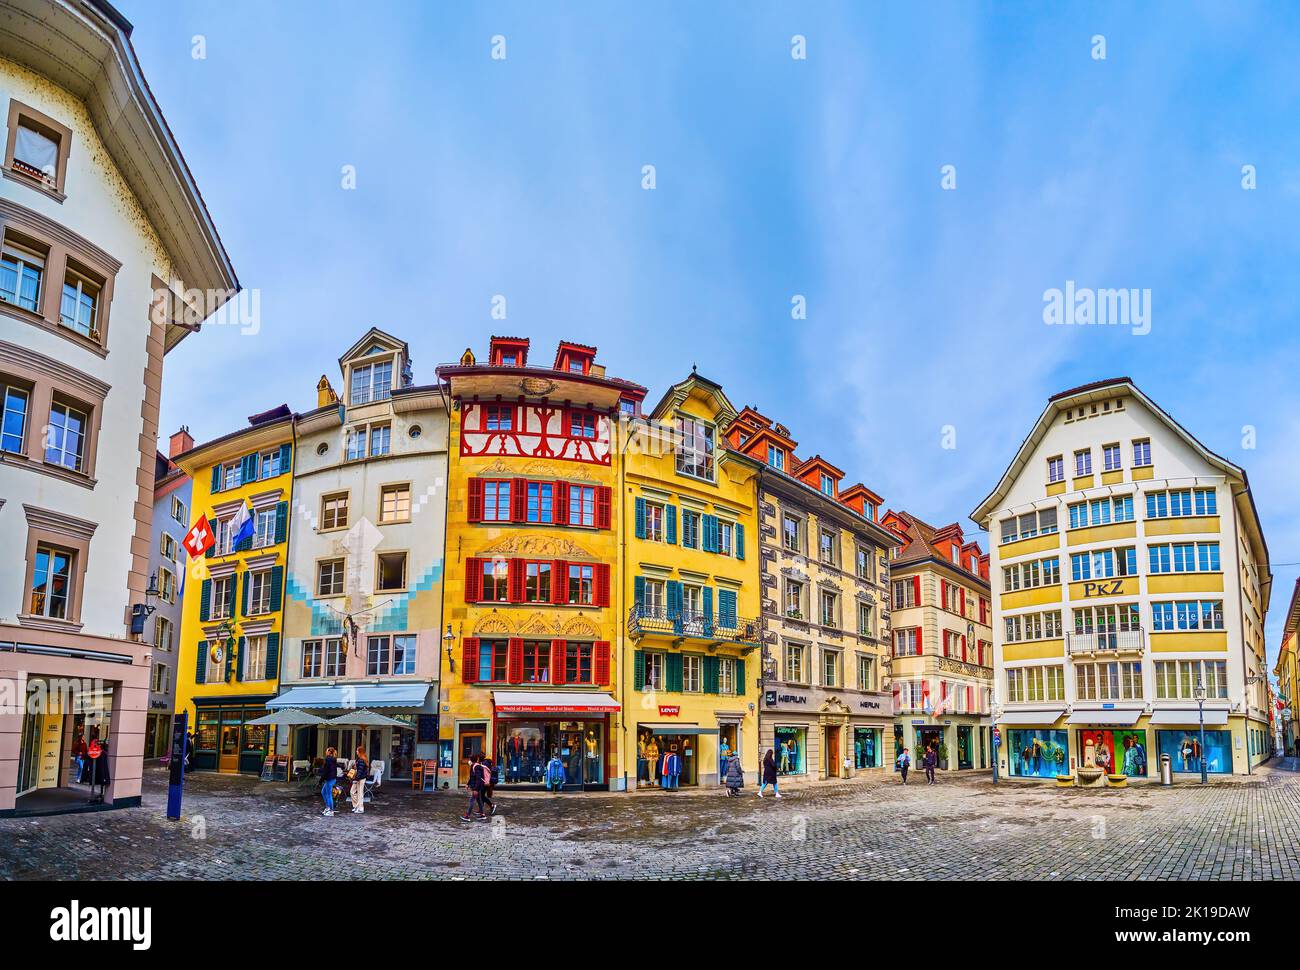 LUCERNE, SWITZERLAND - MARCH 30, 2022: Panorama of Kronmarkt square with medieval wall frescoes on facades of houses, on March 30 in Lucerne, Switzerl Stock Photo